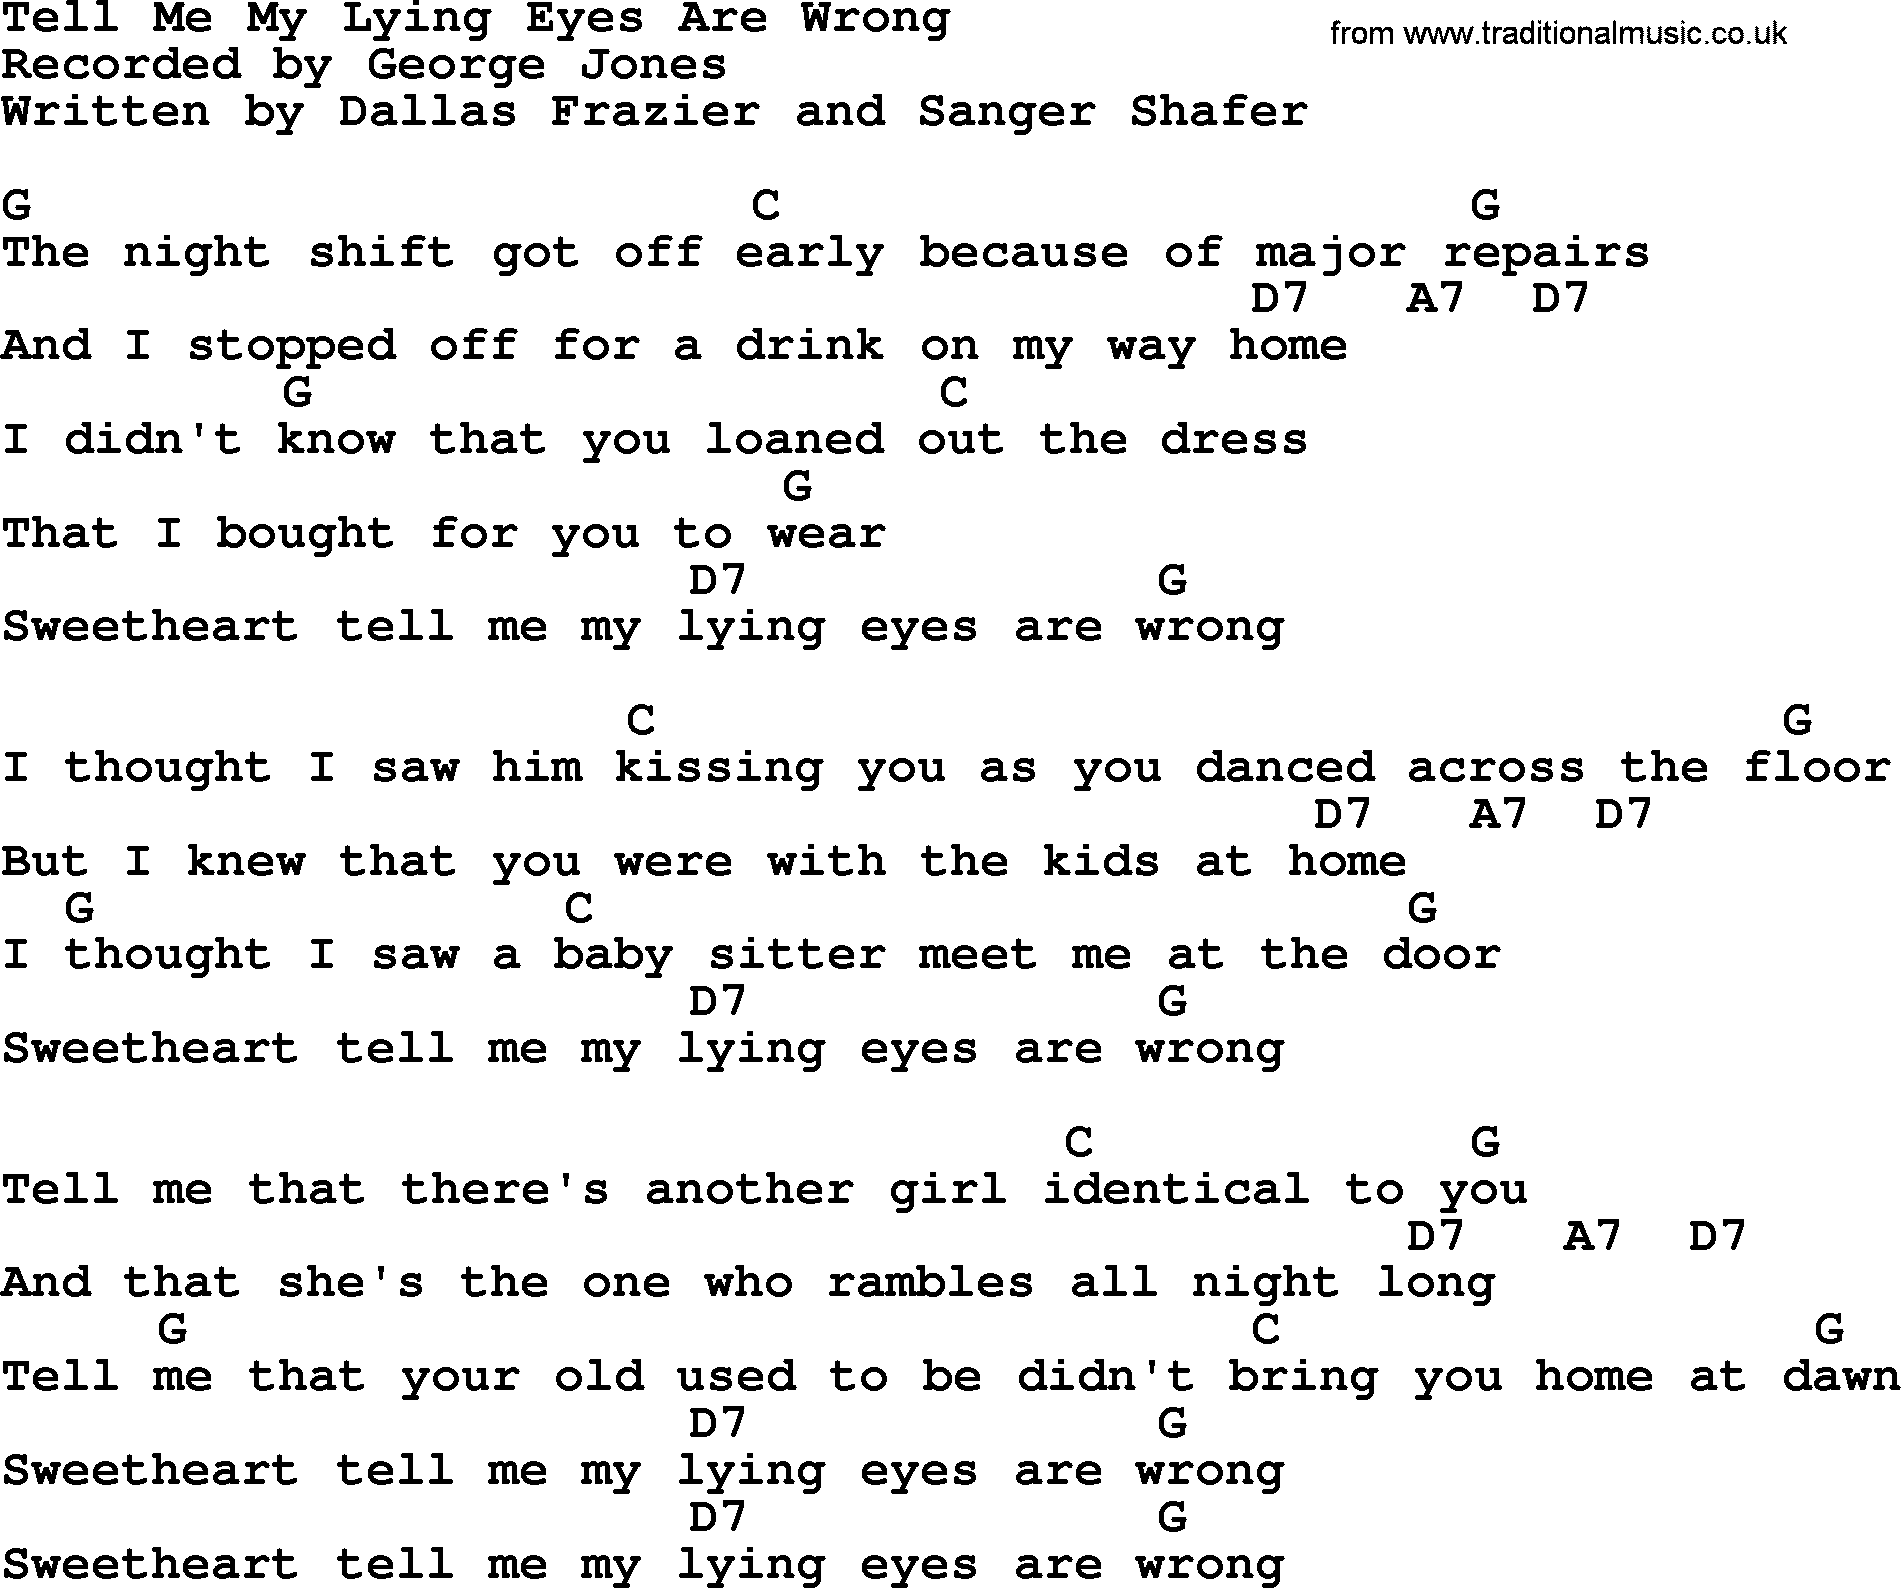 George Jones song: Tell Me My Lying Eyes Are Wrong, lyrics and chords